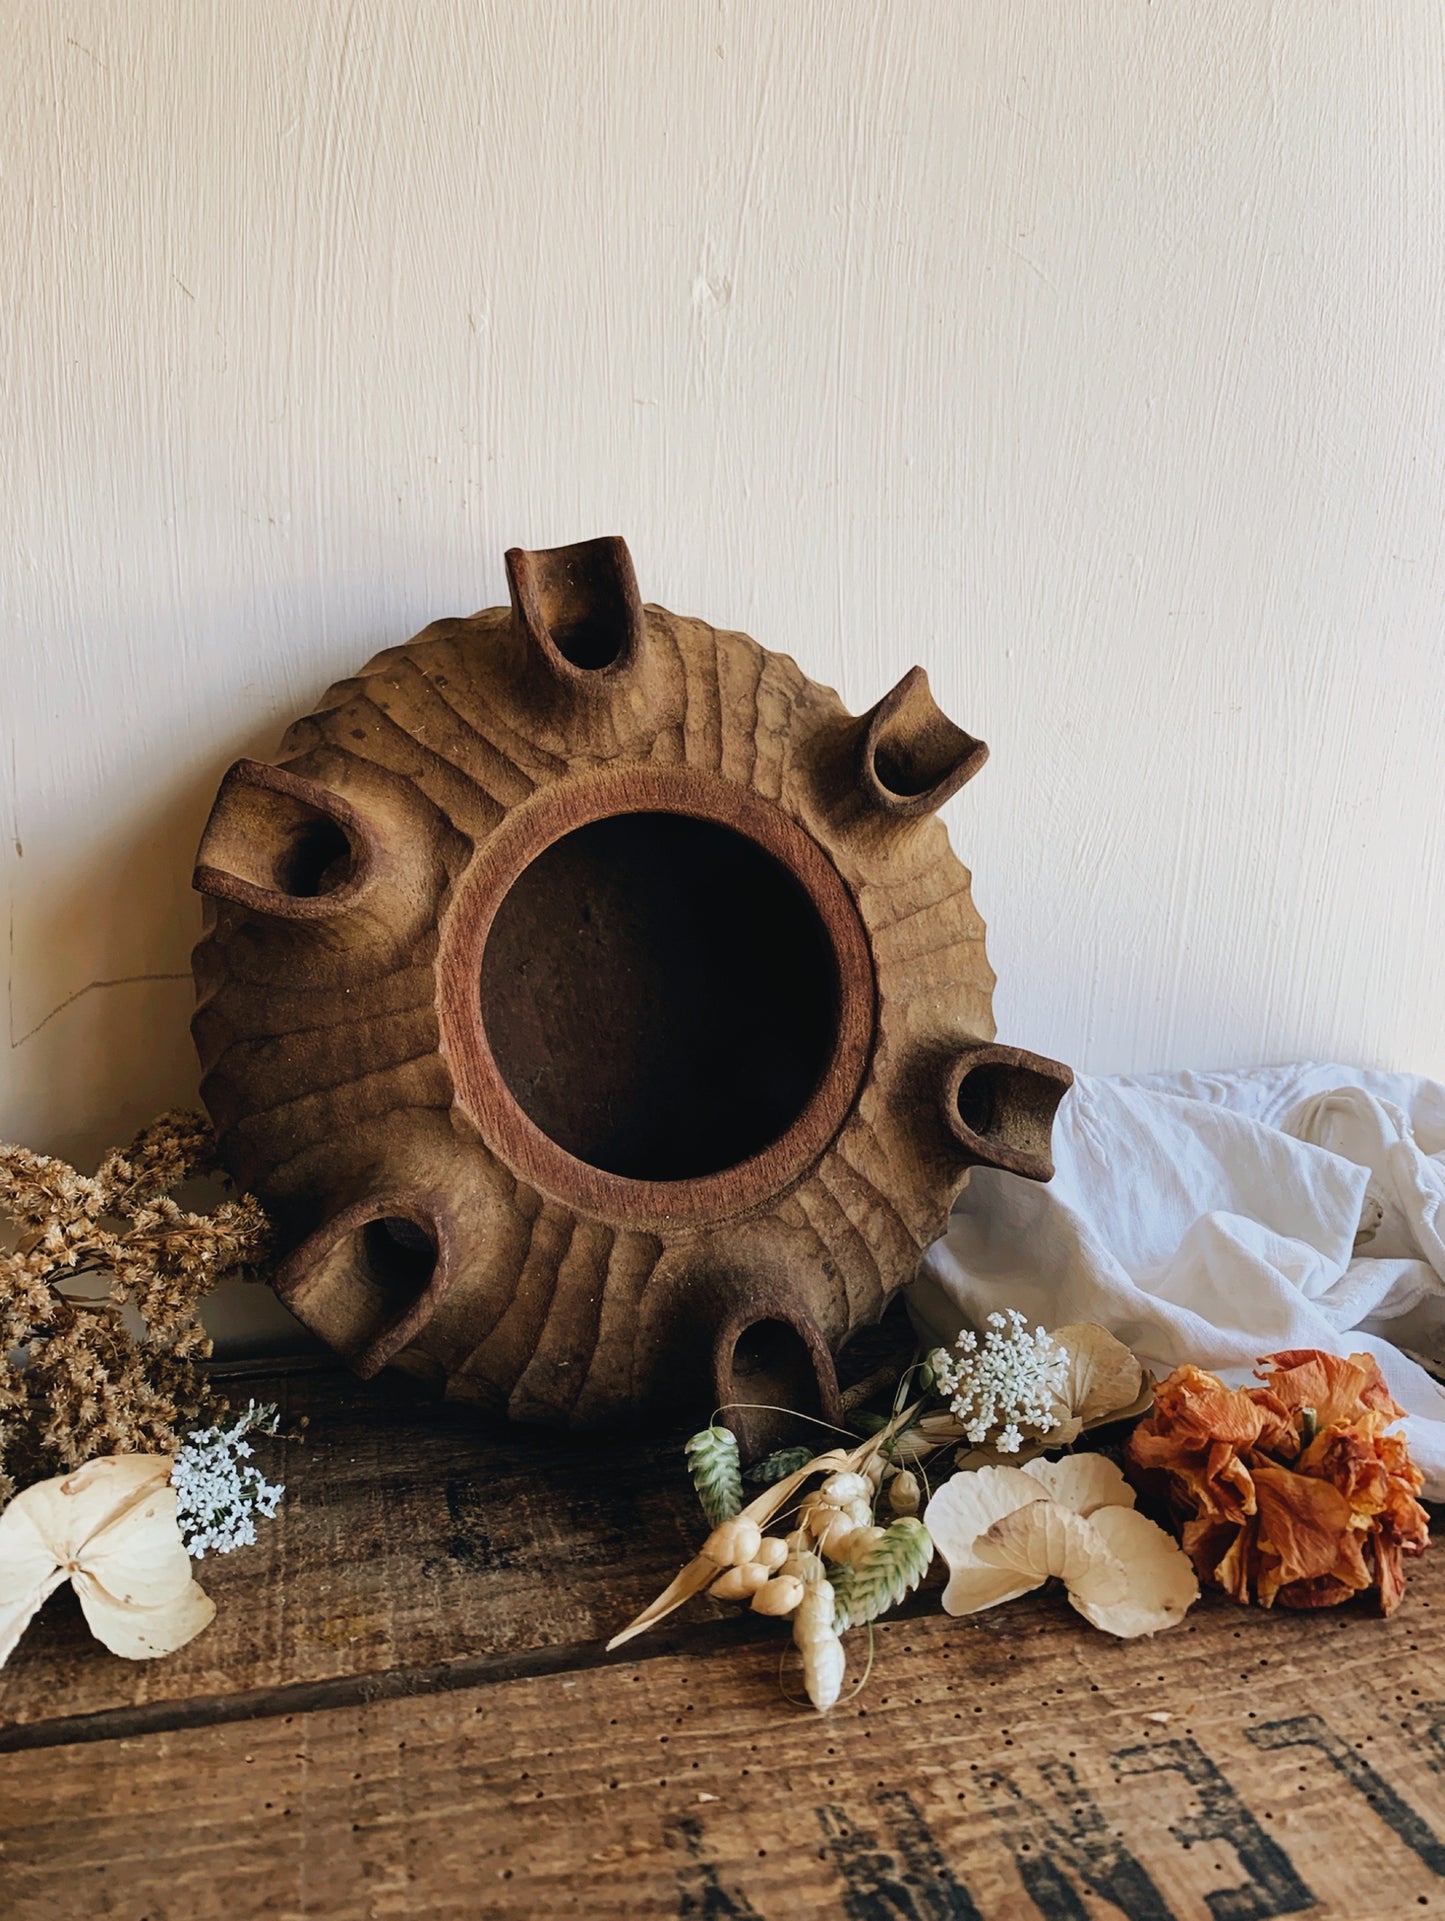 Rustic Hand~carved Wooden Vessel